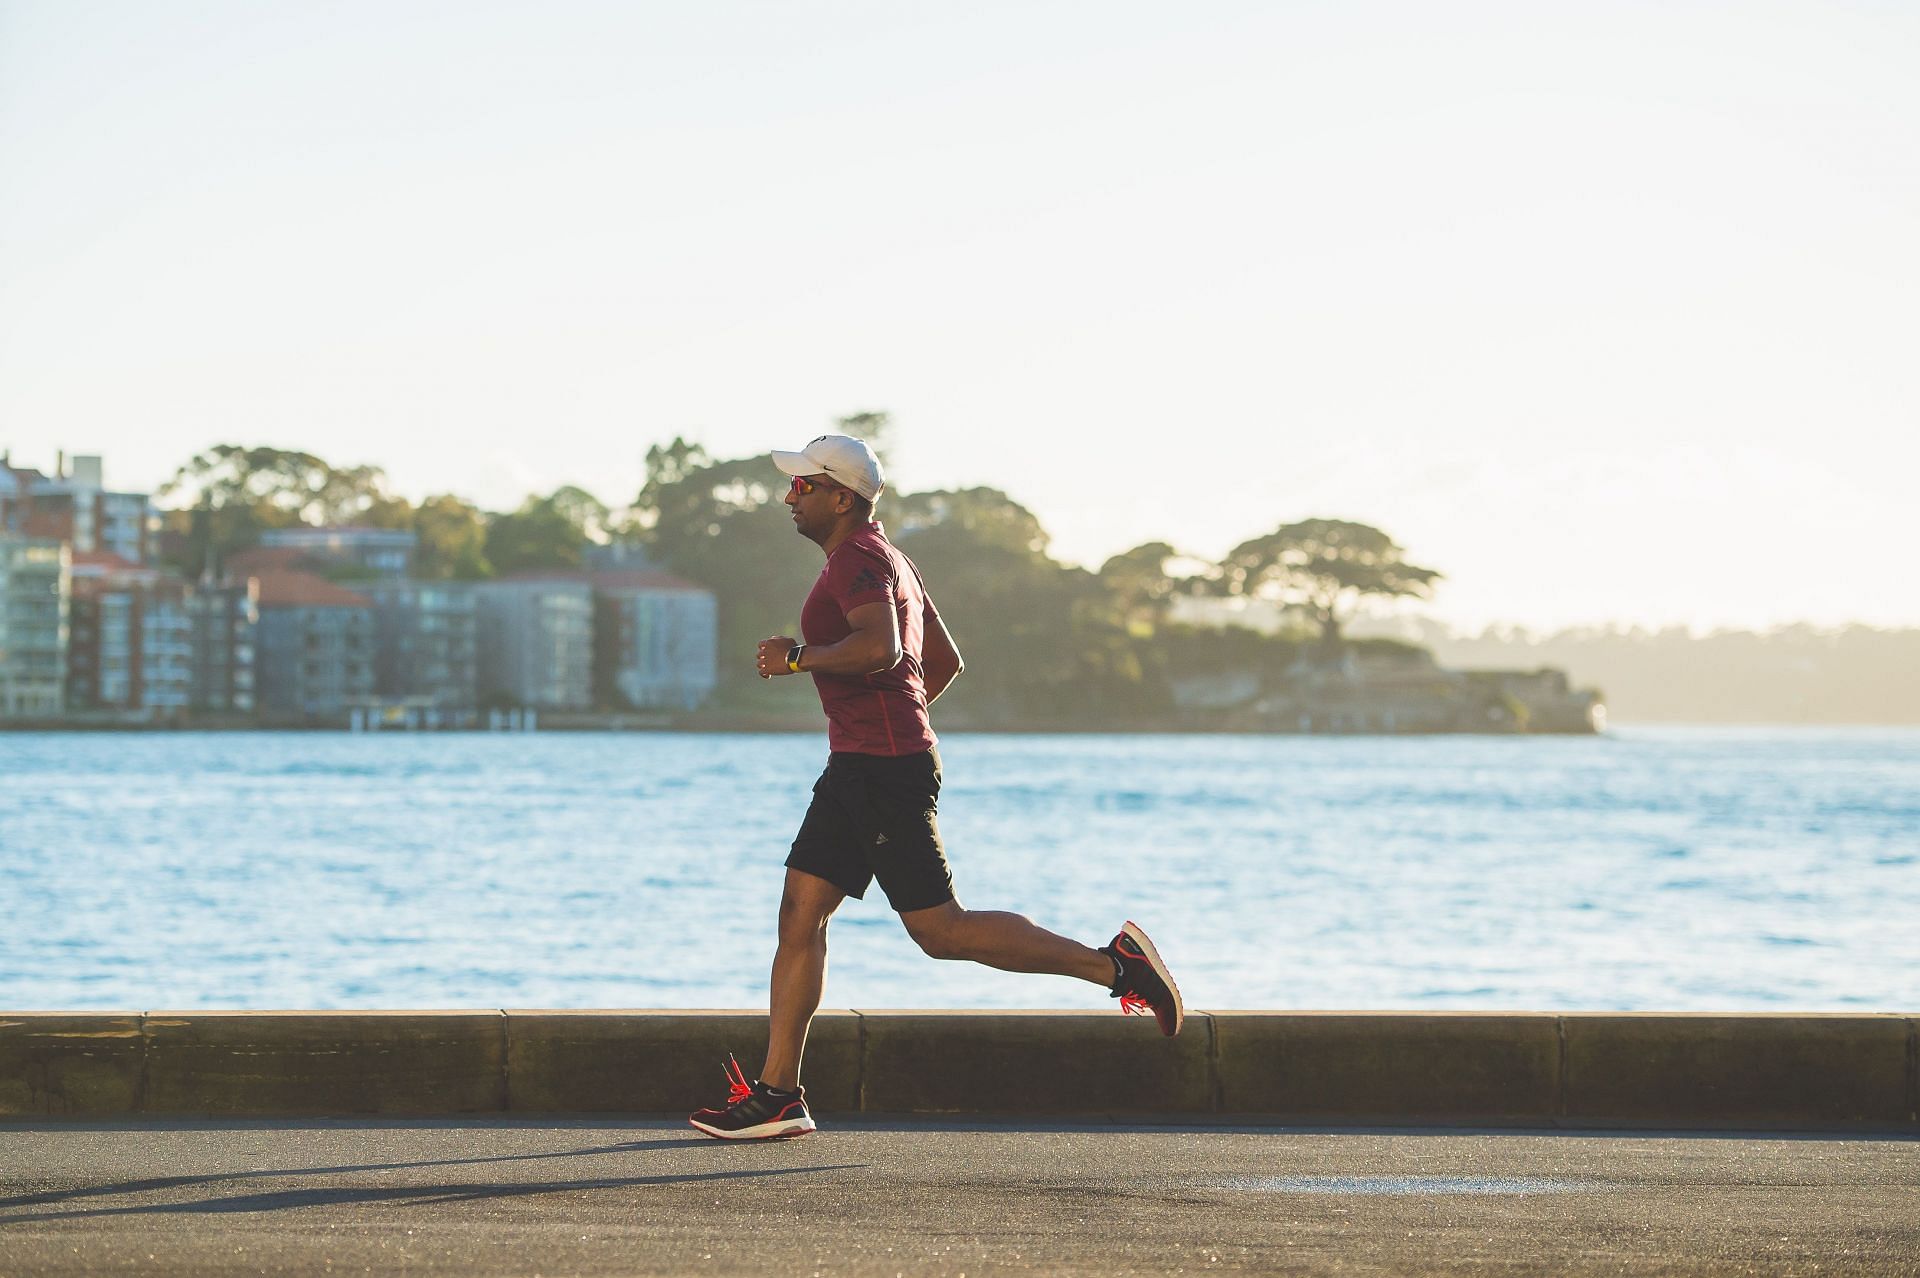 Remember to include regular exercise for a healthy lifestyle. (Image via Unsplash/Chander R)